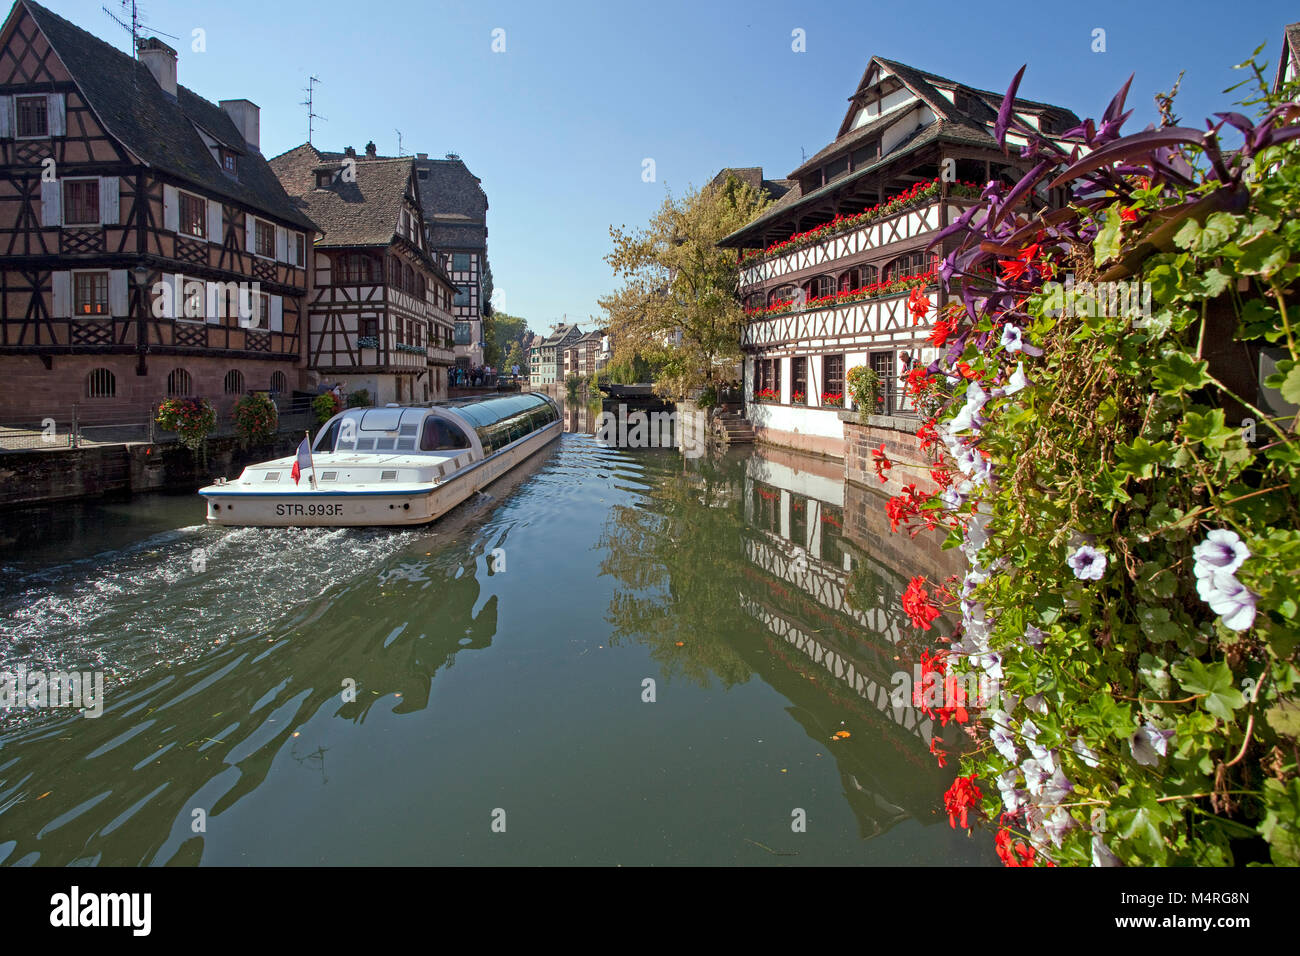 Excursion boat on Ill river passing Maison des Tanneurs at La Petite France (Little France), Strasbourg, Alsace, Bas-Rhin, France, Europe Stock Photo